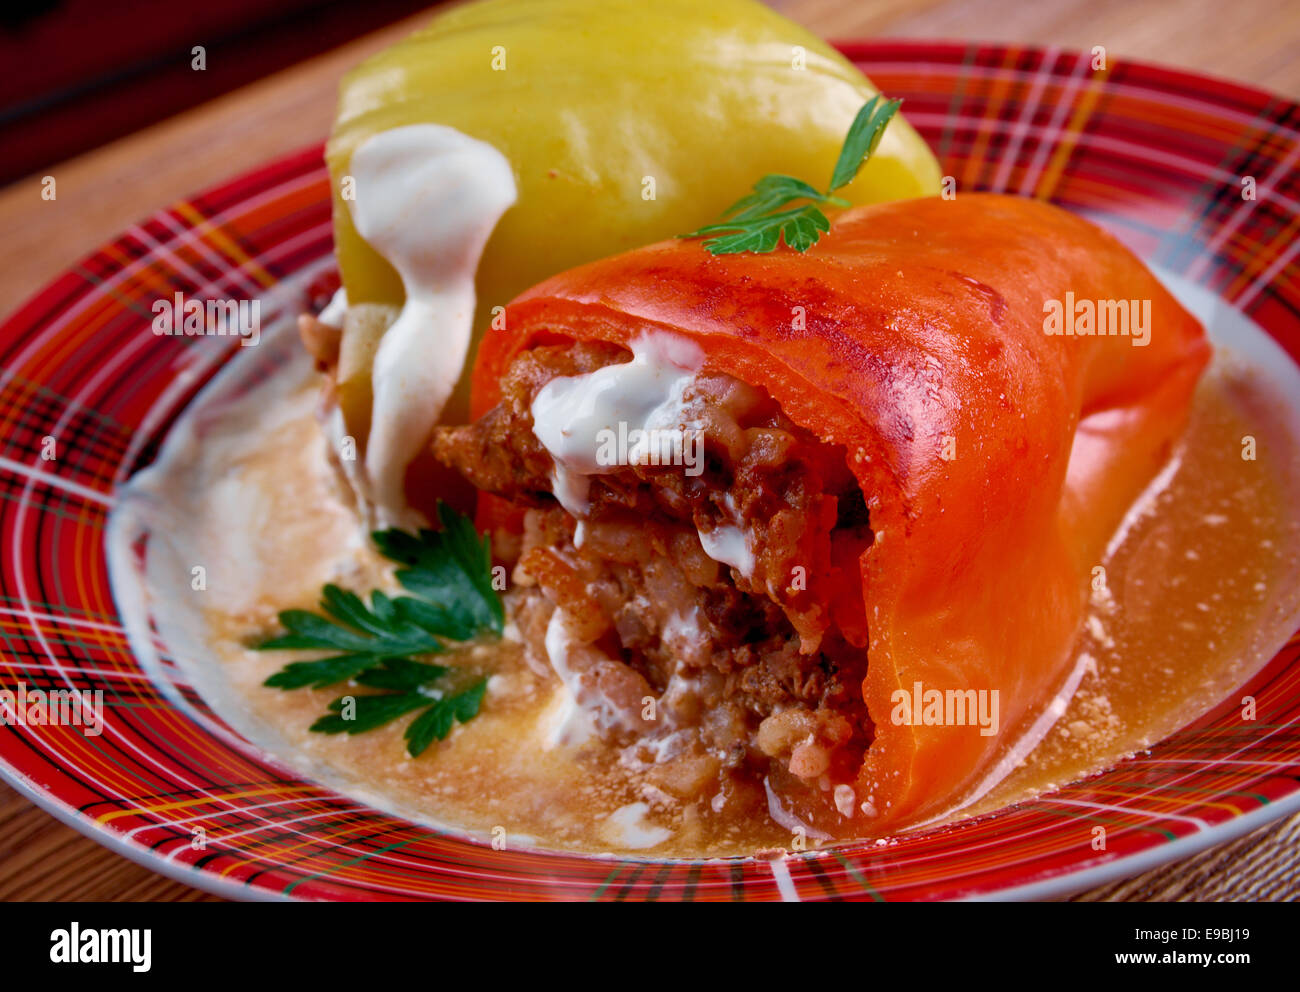 Stuffed paprika with liver, pork, rice and vegetables.Balkan cuisine Stock Photo